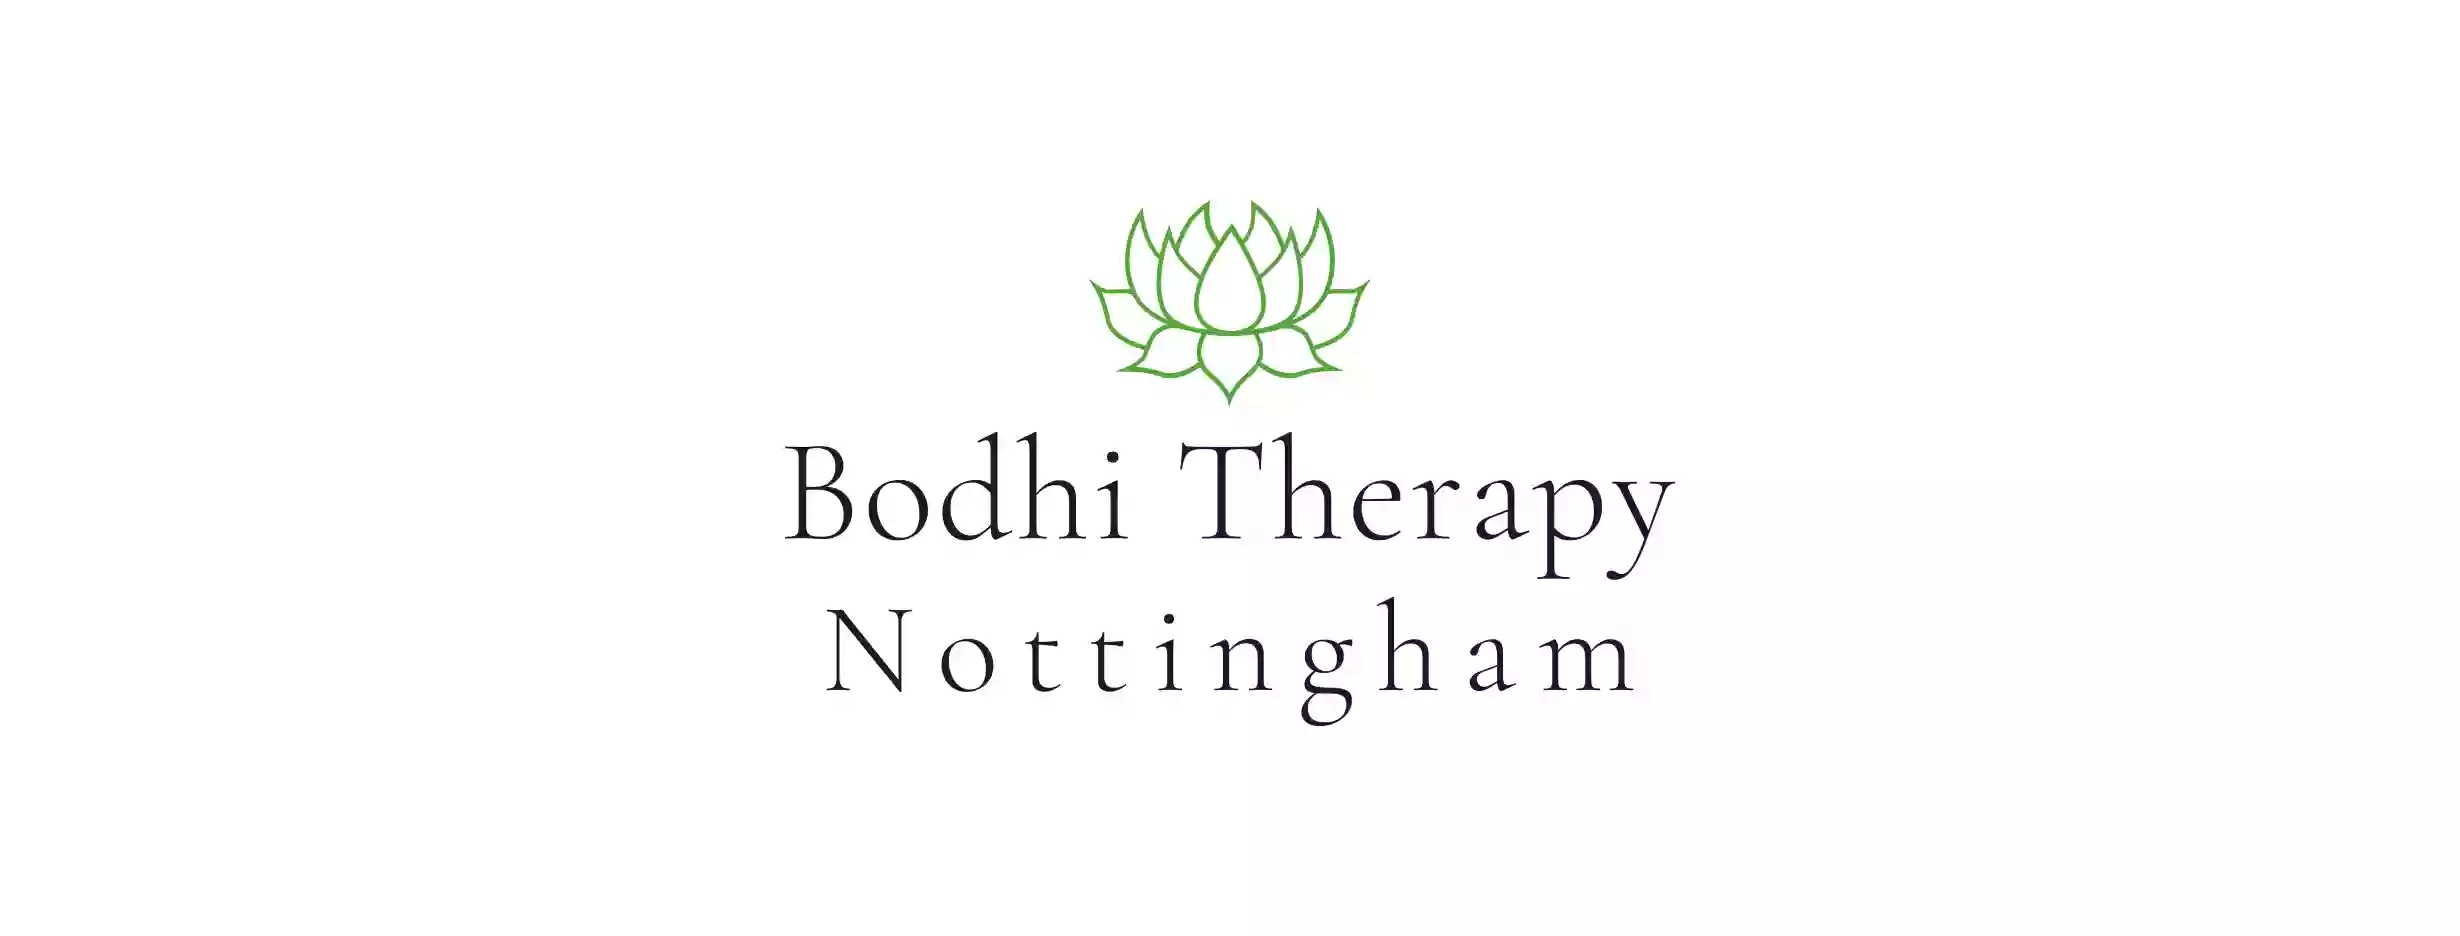 Bodhi Therapy Nottingham